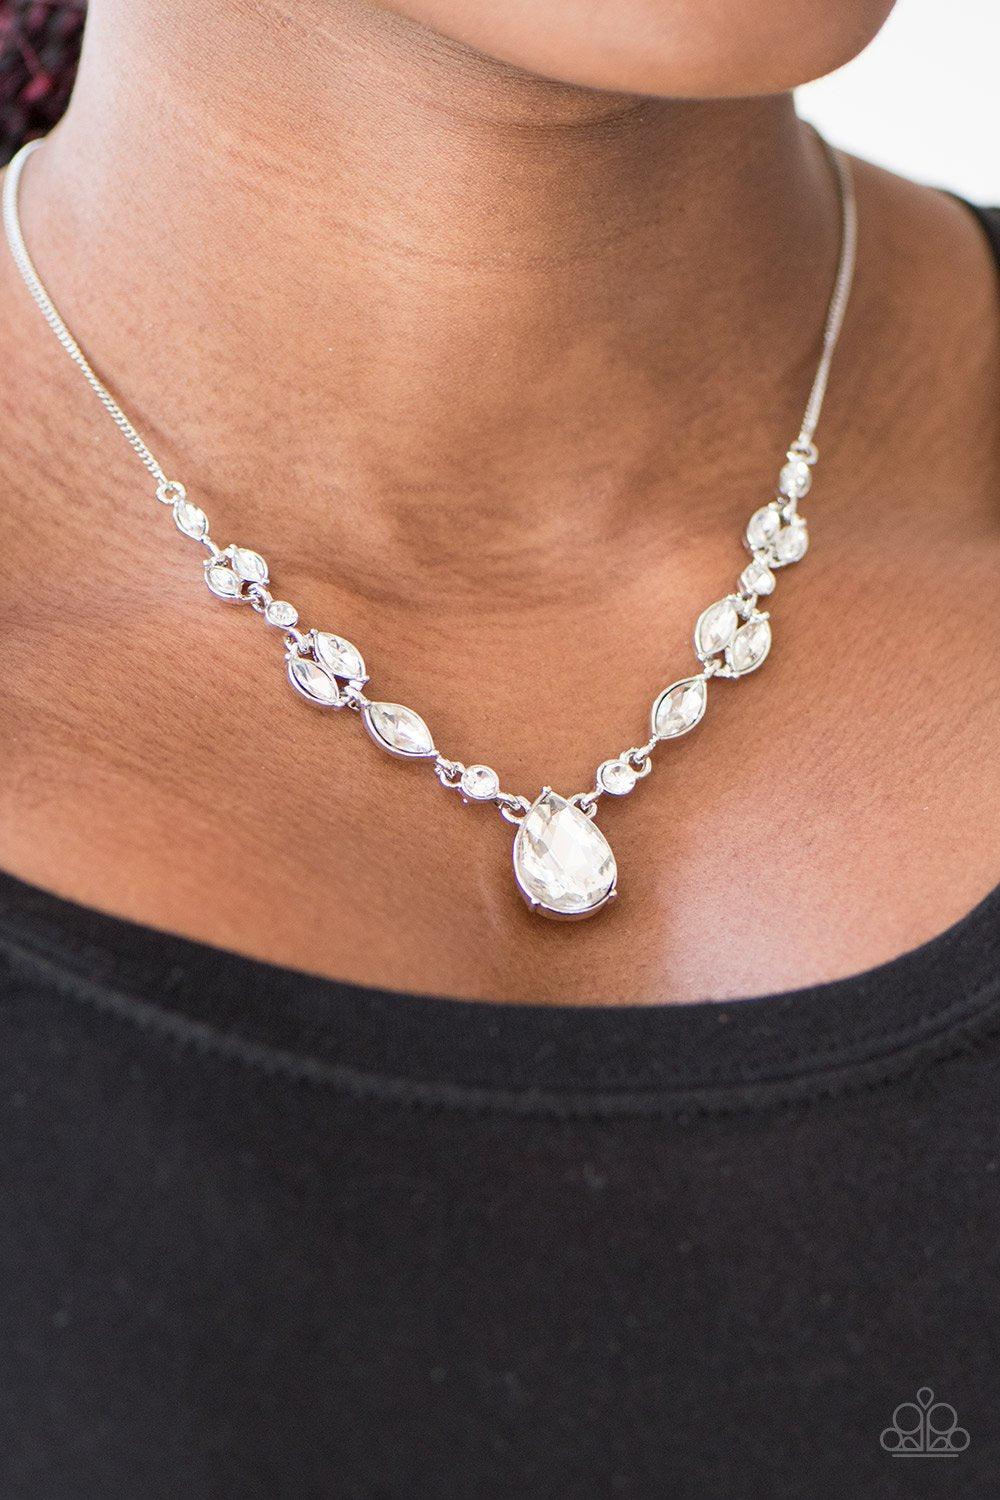 Royal Rendezvous White Teardrop Rhinestone Necklace - Paparazzi Accessories-CarasShop.com - $5 Jewelry by Cara Jewels